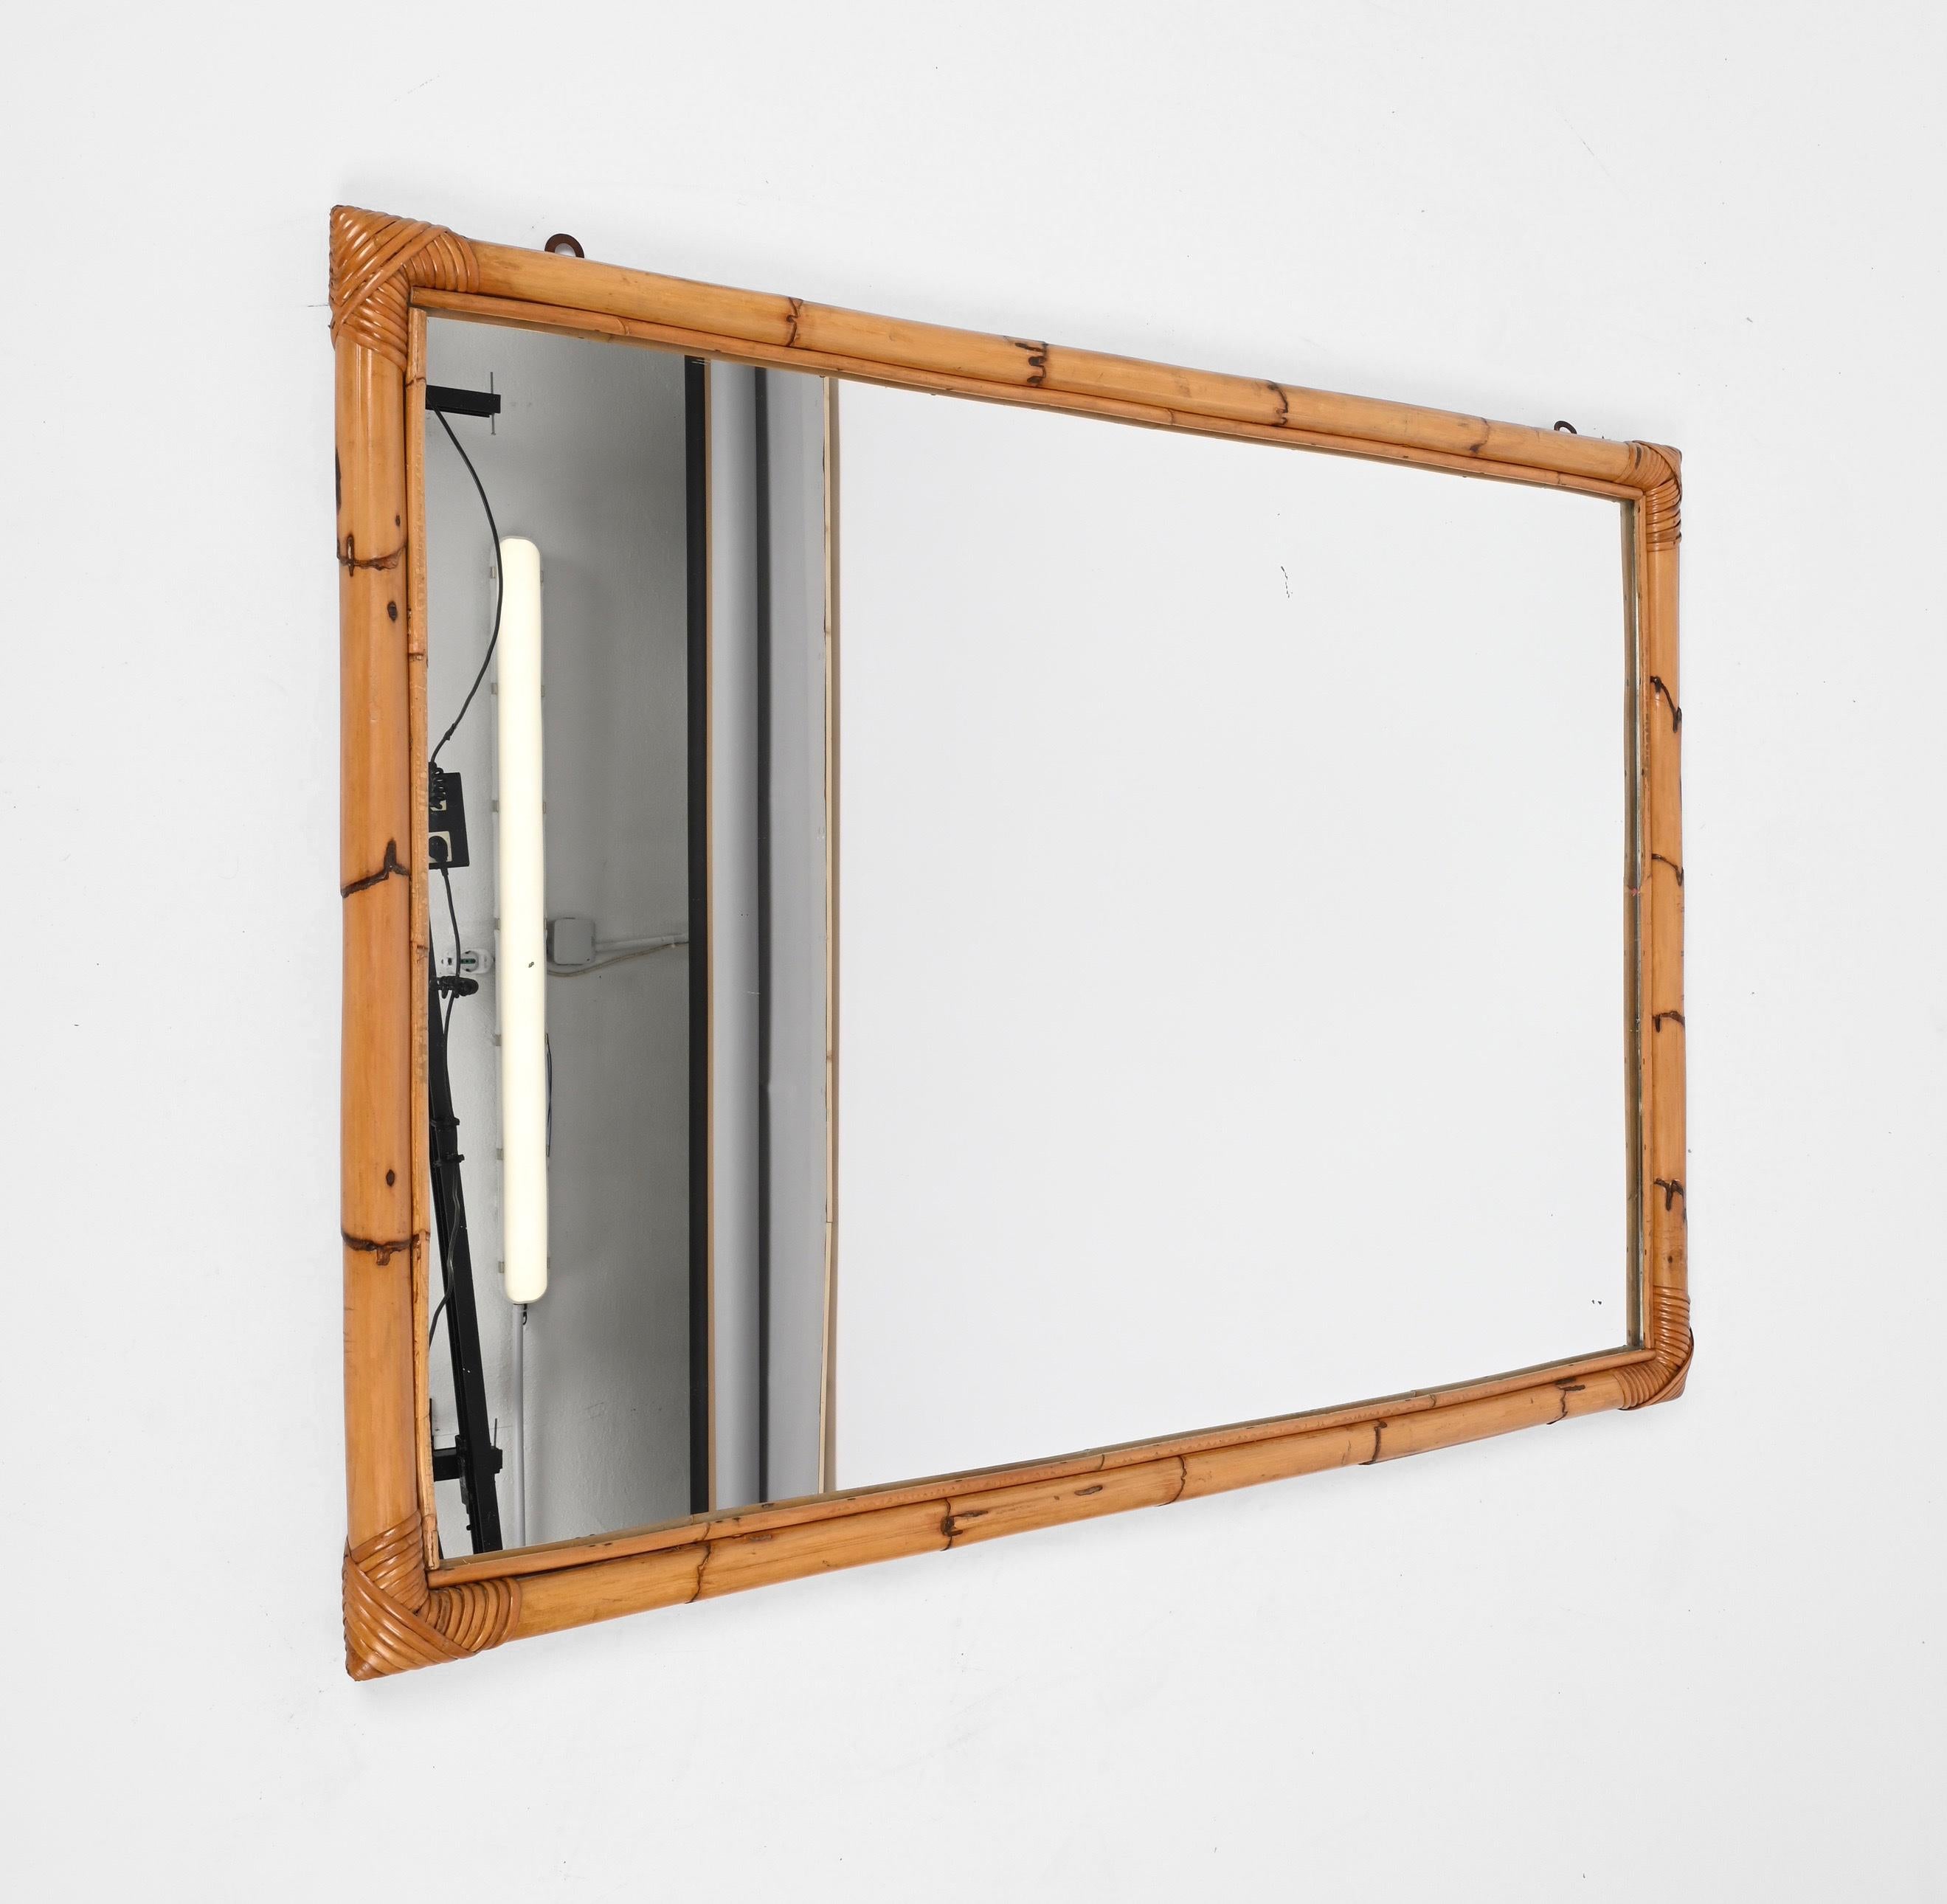 20th Century Midcentury Large Rectangular Italian Mirror with Double Bamboo Cane Frame, 1970s For Sale